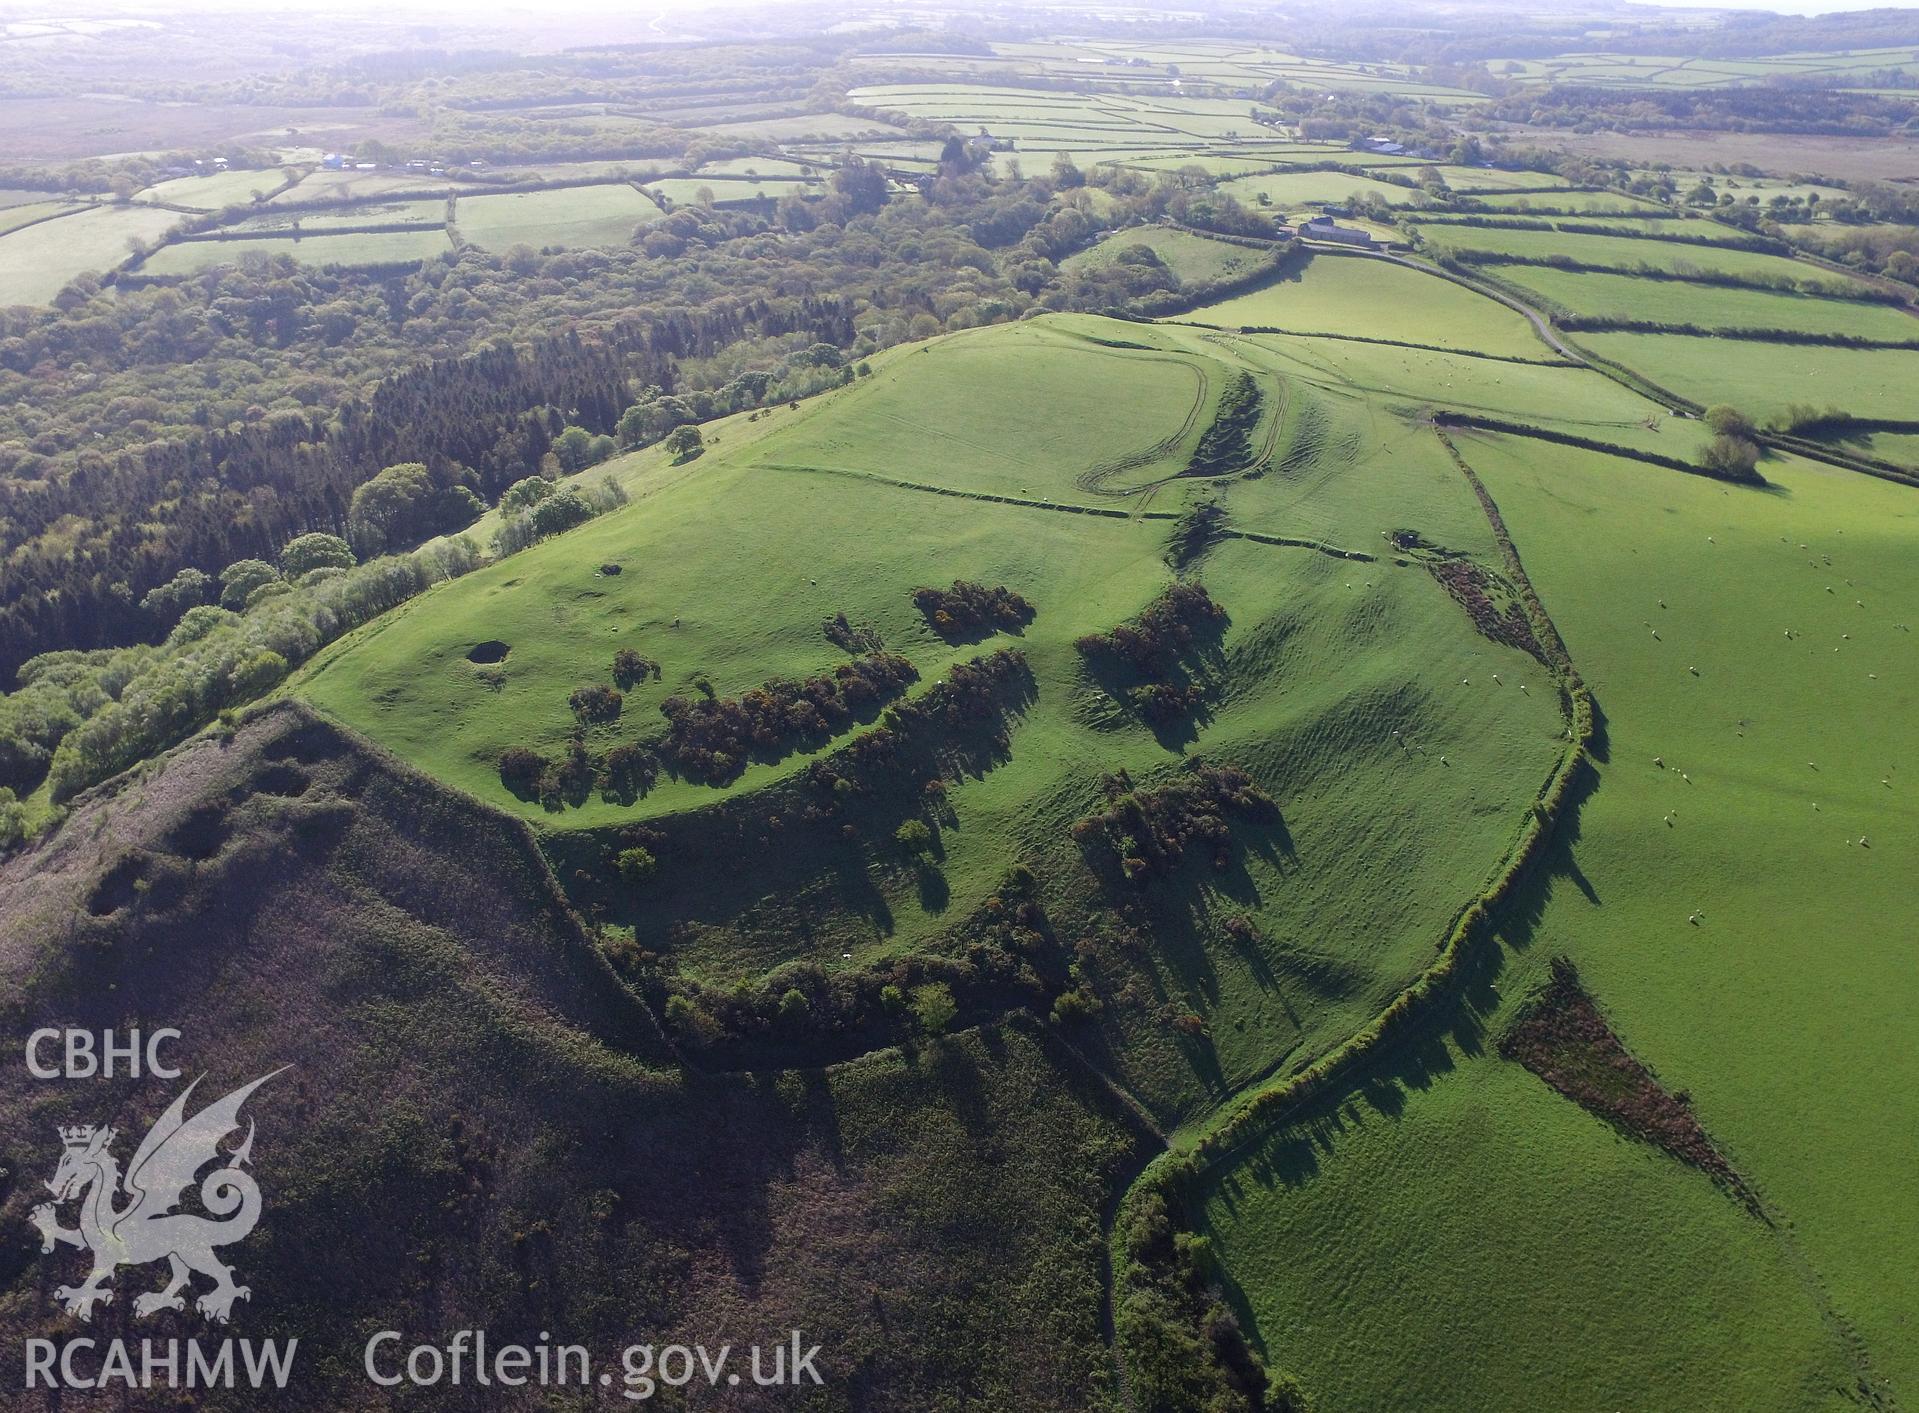 Colour photo showing aerial view of Cil Ifor top promontory fort, taken by Paul R. Davis, 13th May 2018.